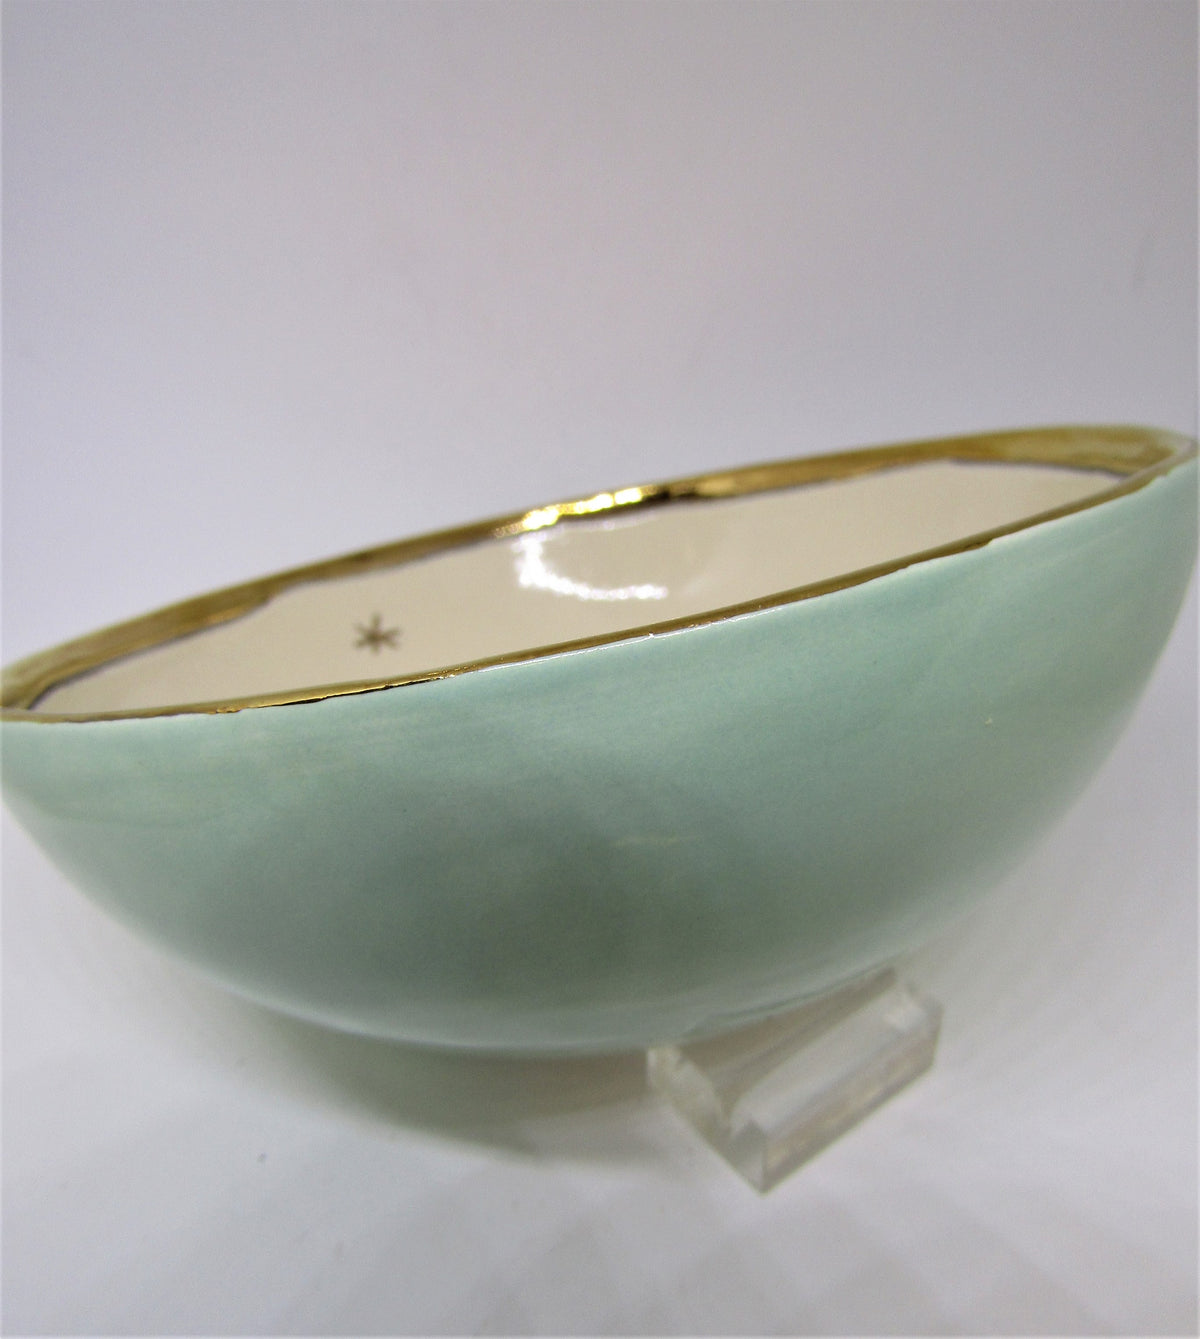 Bowl by Sophie Smith